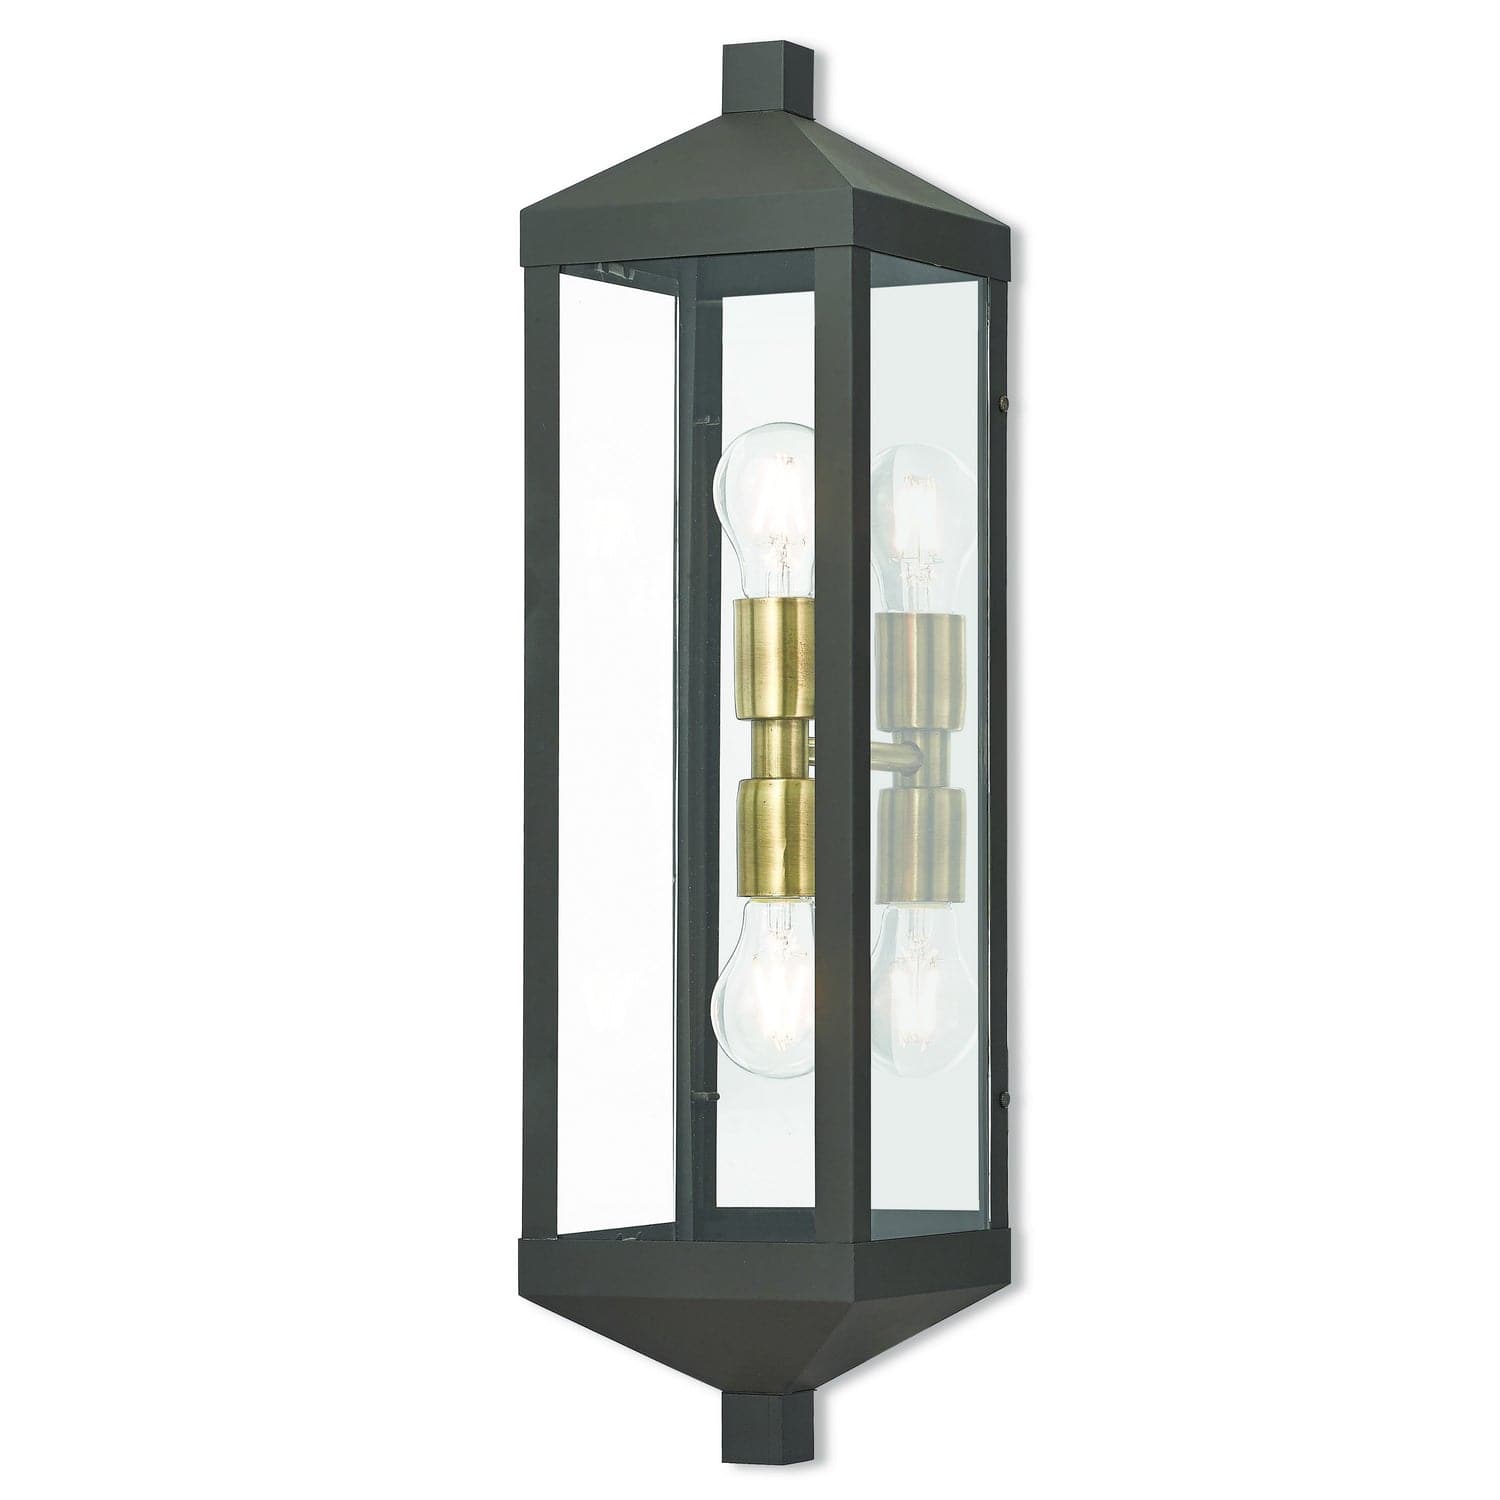 Livex Lighting - 20583-07 - Two Light Outdoor Wall Lantern - Nyack - Bronze w/ Antique Brass Cluster and Polished Chrome Stainless Steel